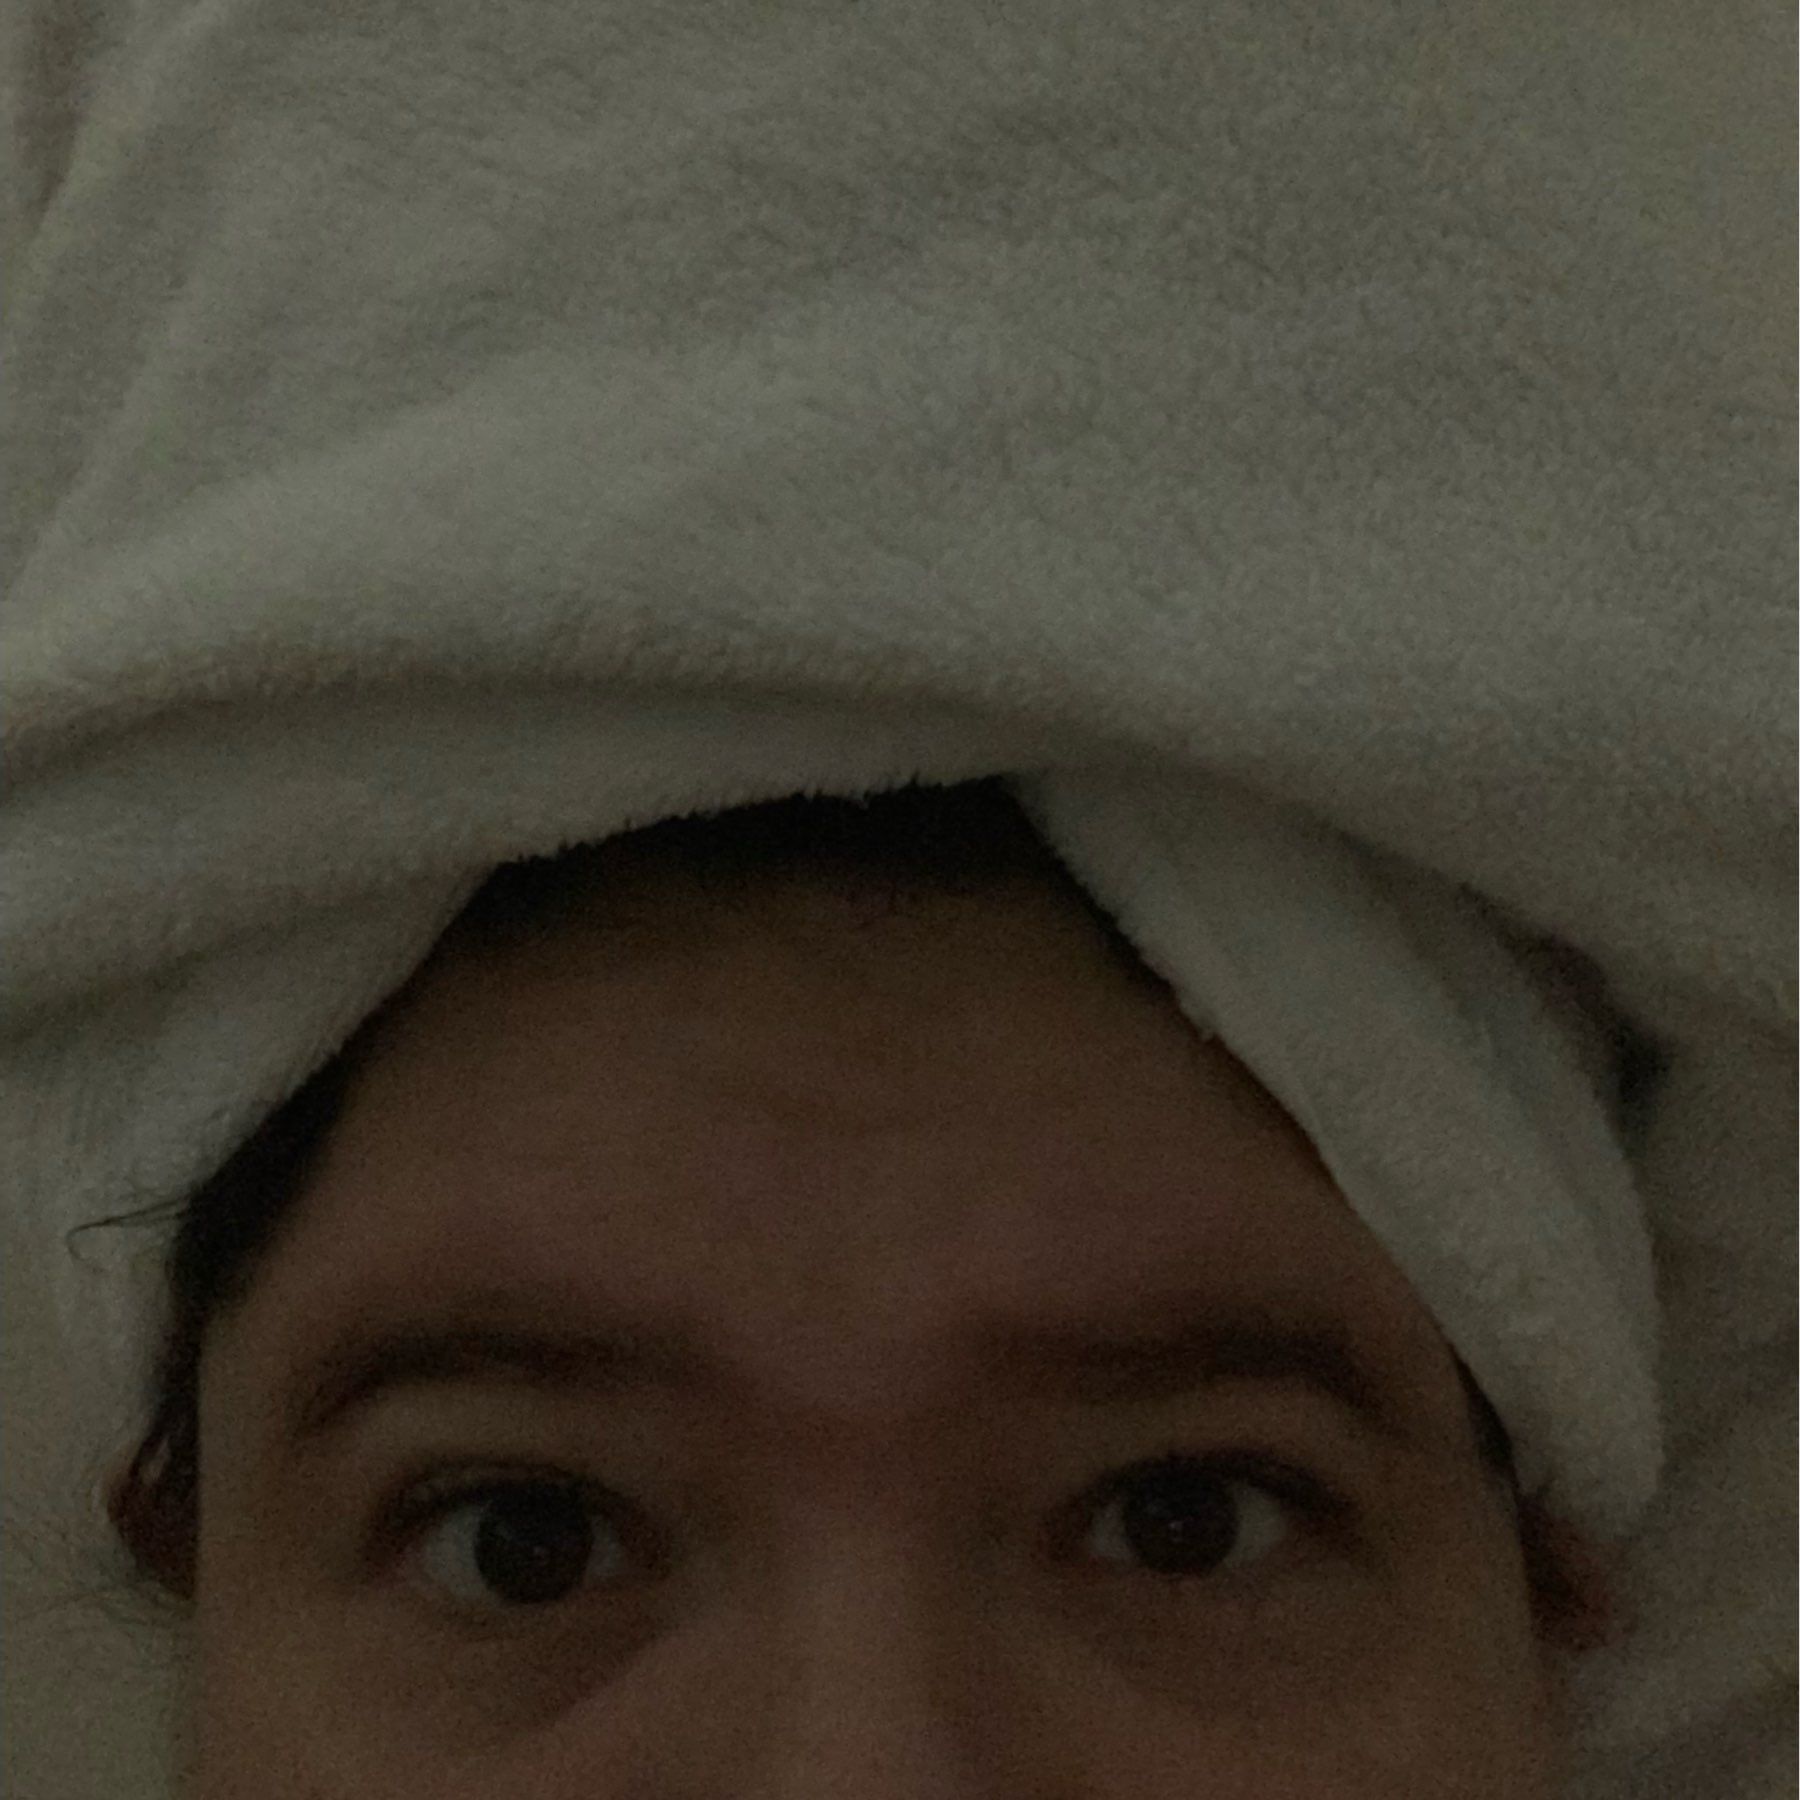 me, from the nose up, with a white towel on my head.